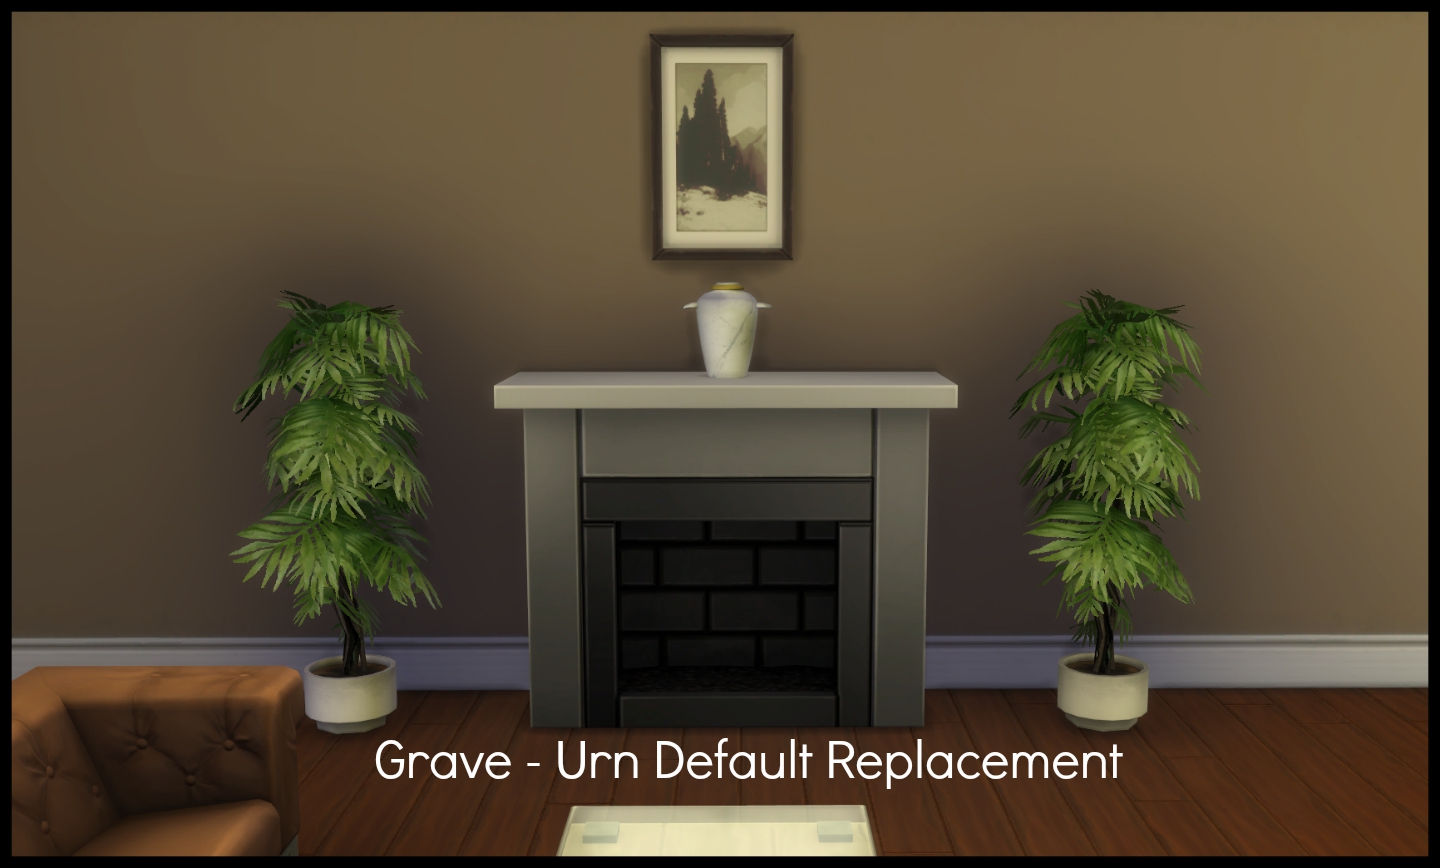 My Sims 4 Blog: Grave/Urn Default Replacements by Elias943